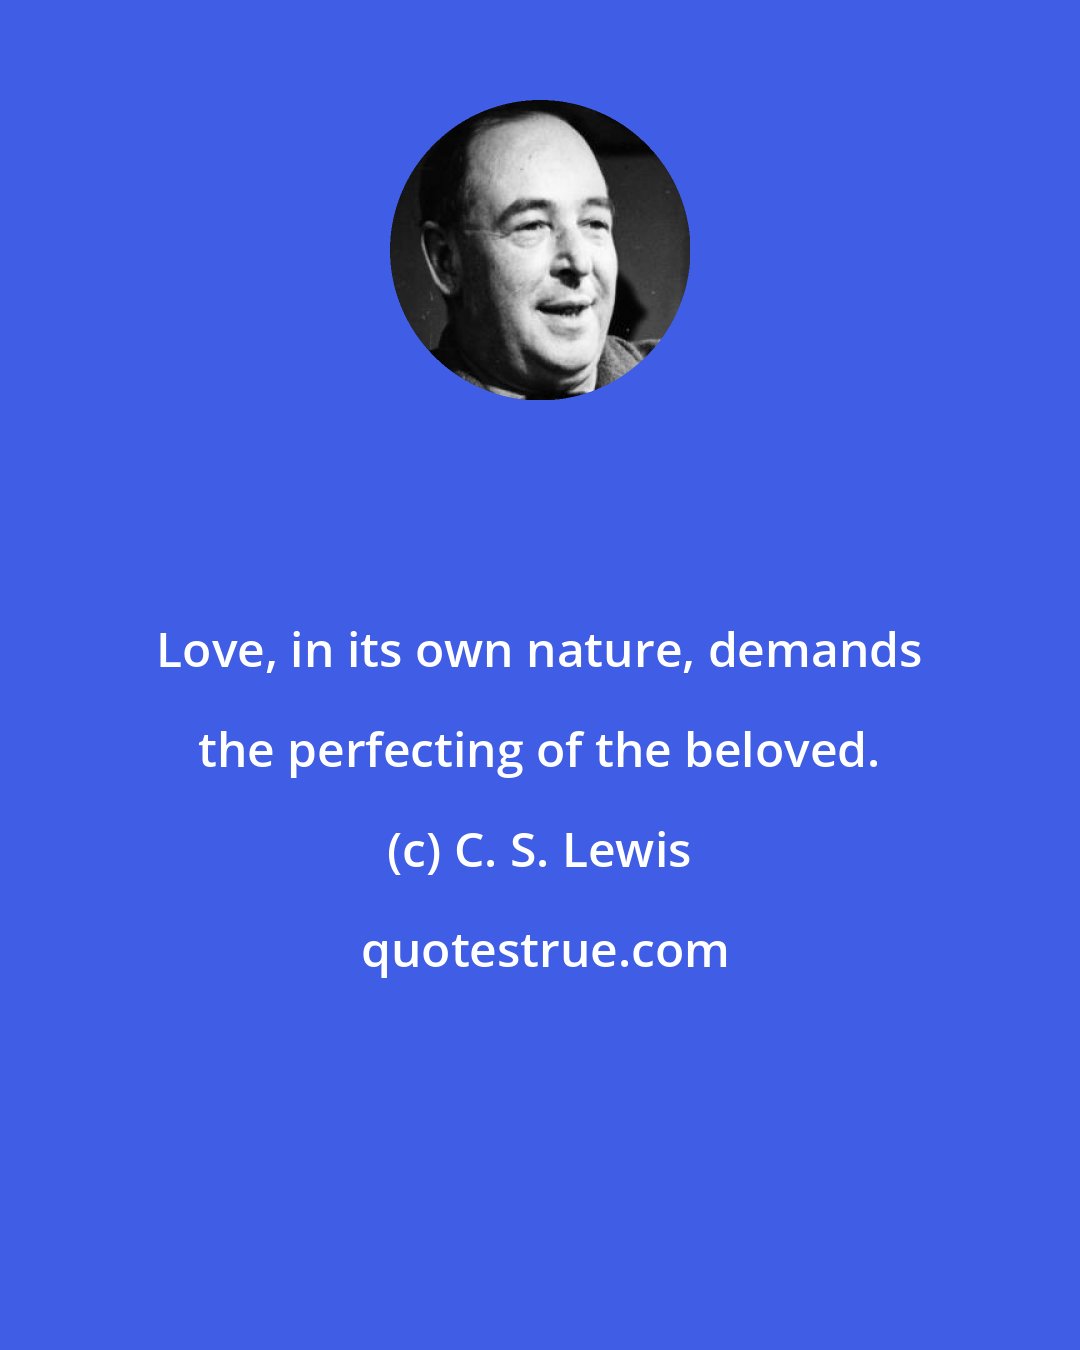 C. S. Lewis: Love, in its own nature, demands the perfecting of the beloved.